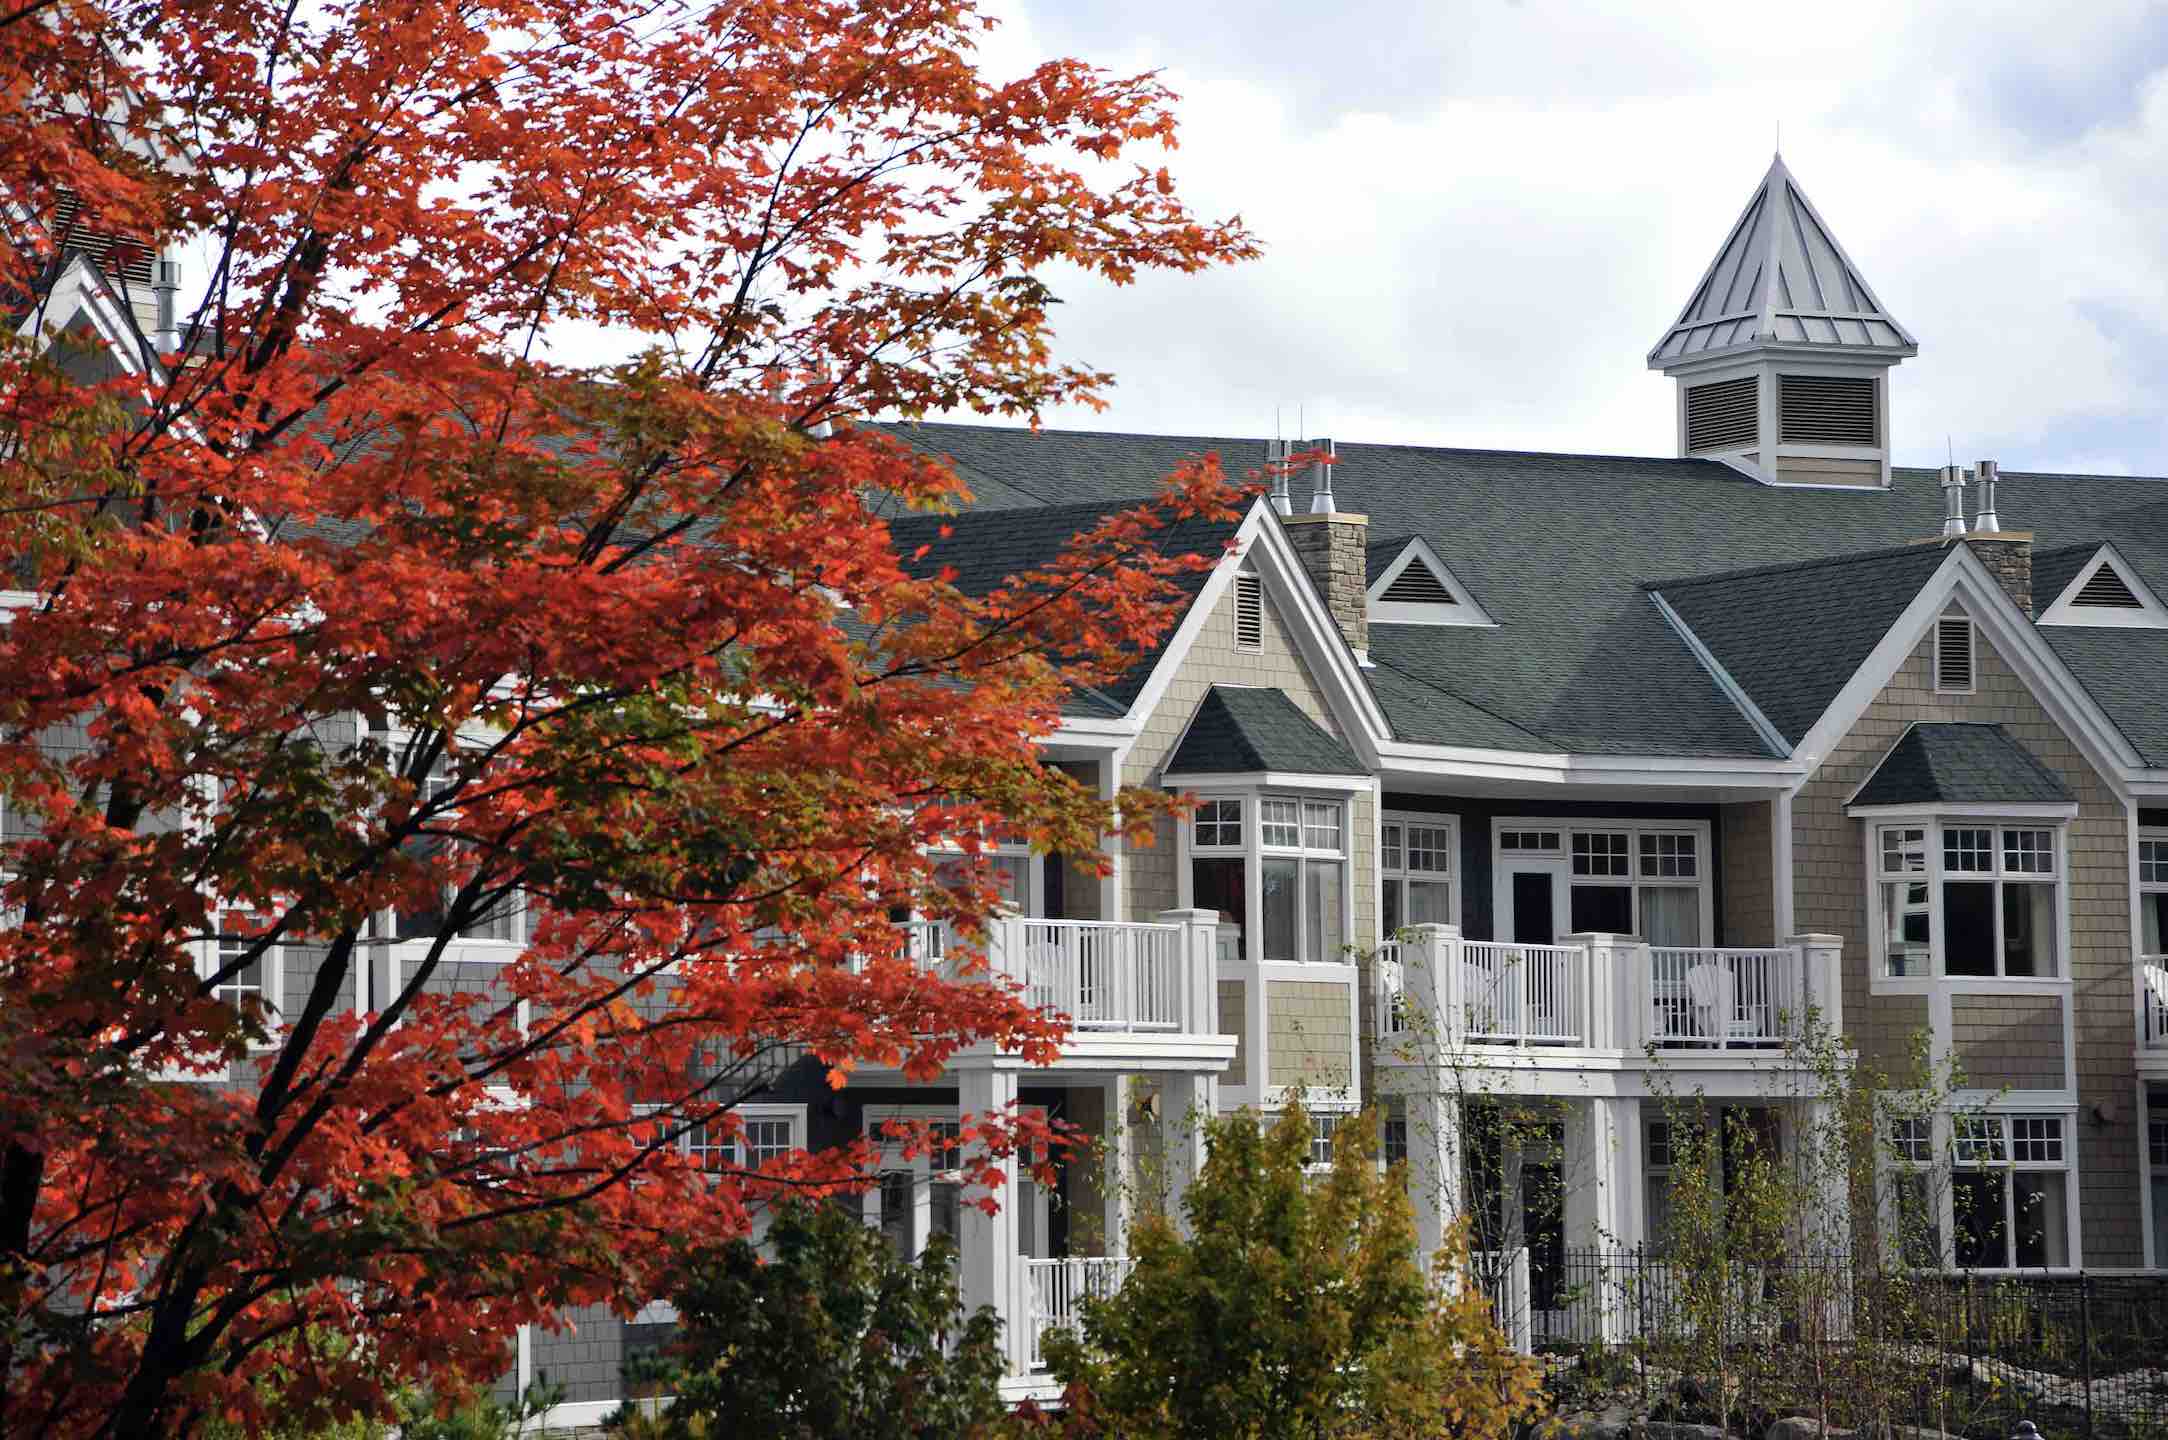 The JW MArriott Rosseau resort seen in the fall and one of the top Muskoka resorts year round